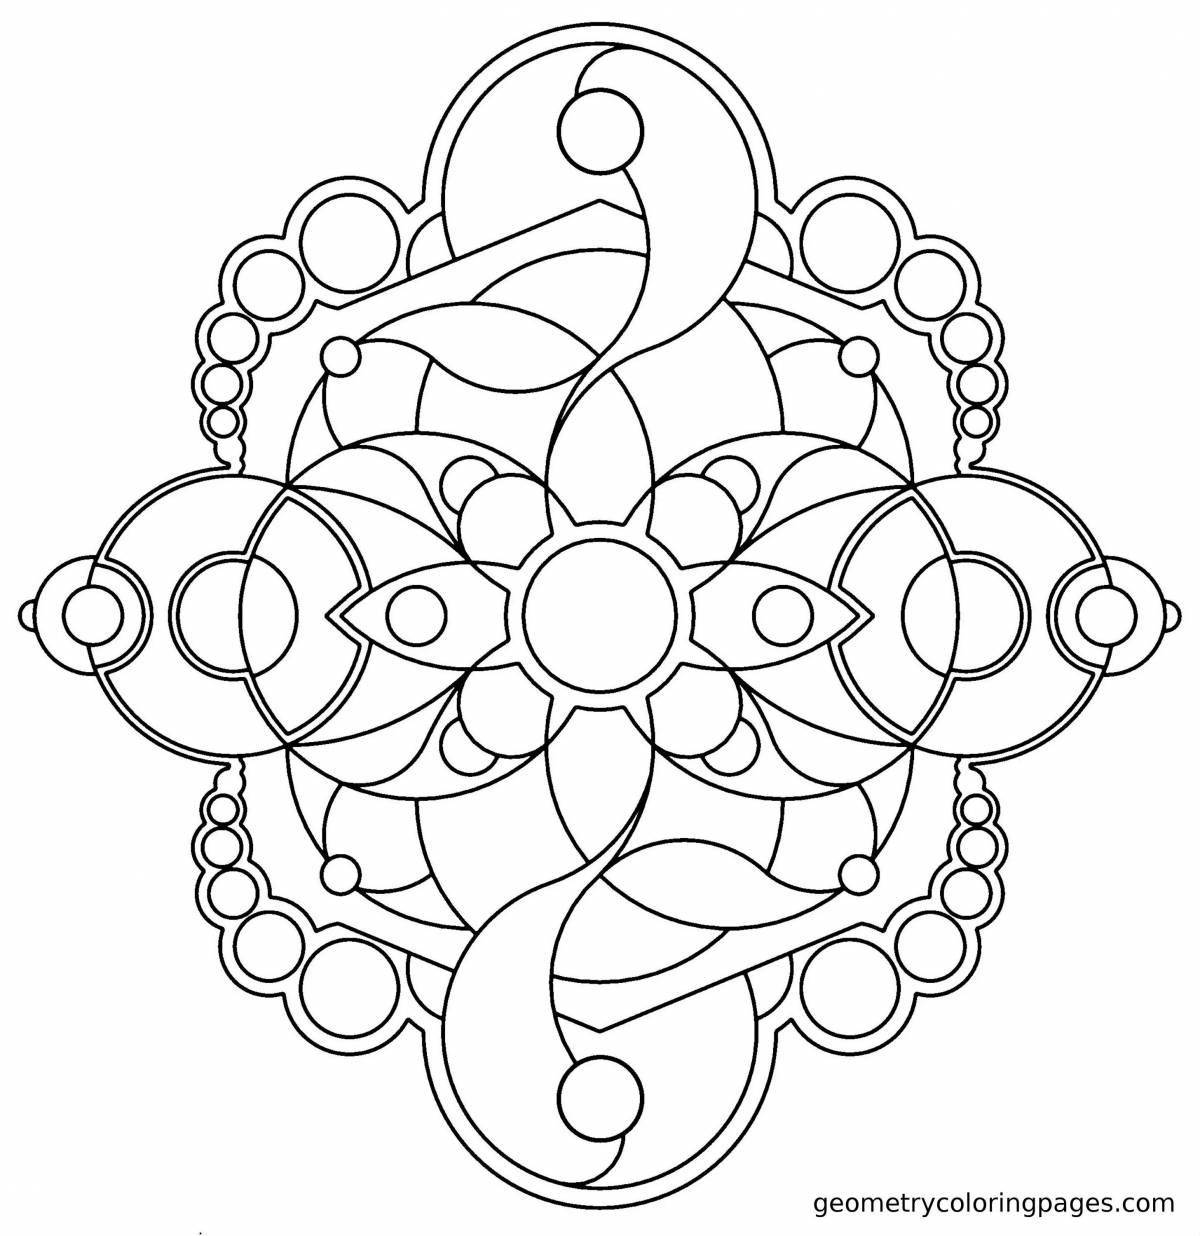 Coloring page with intricate geometric patterns for kids